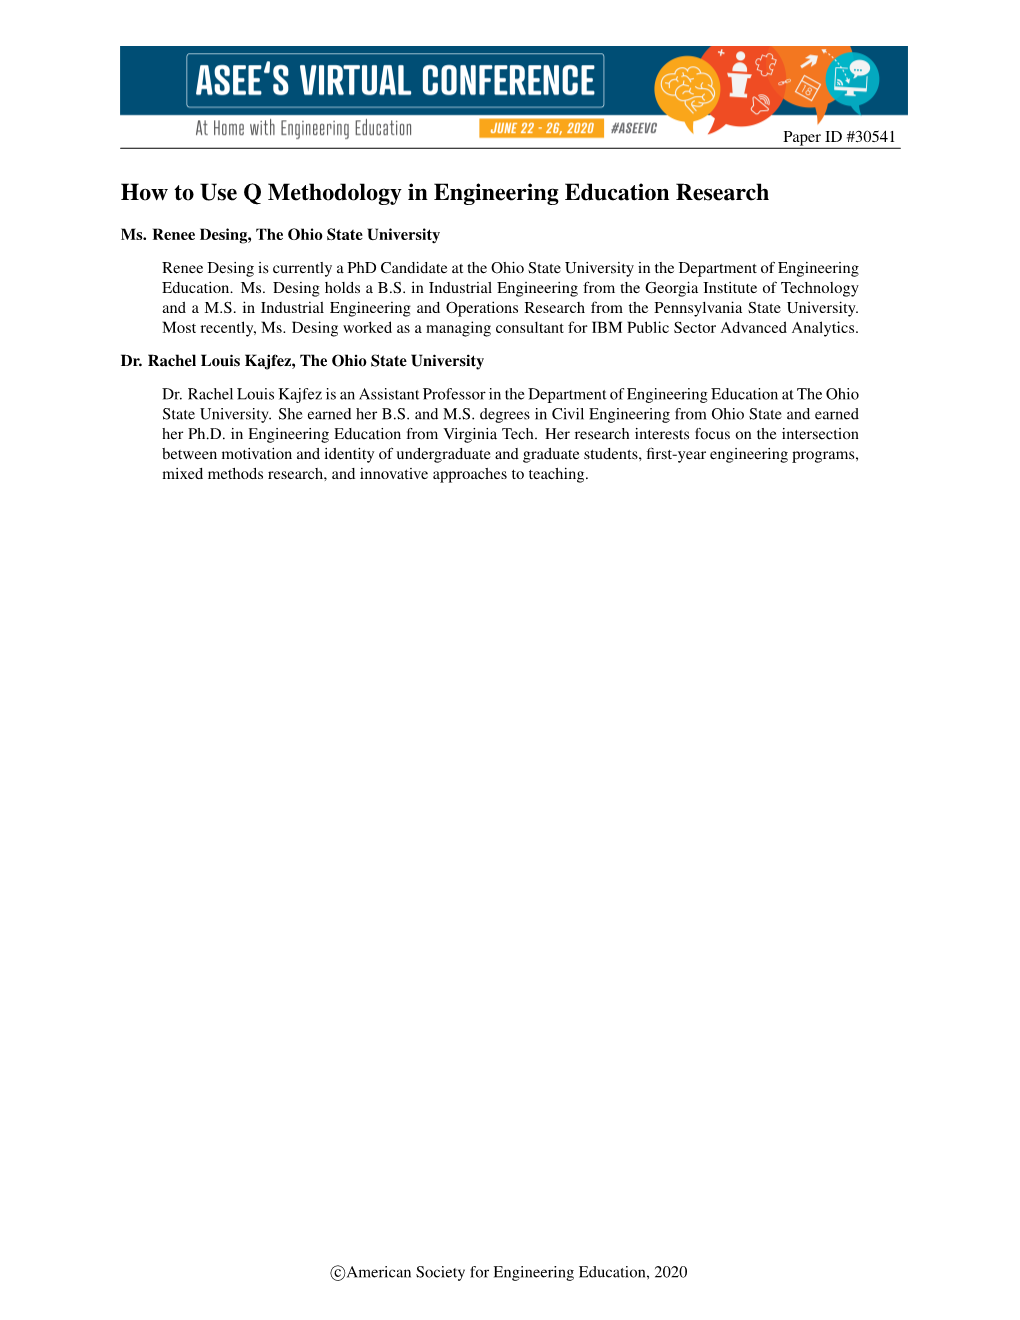 How to Use Q Methodology in Engineering Education Research